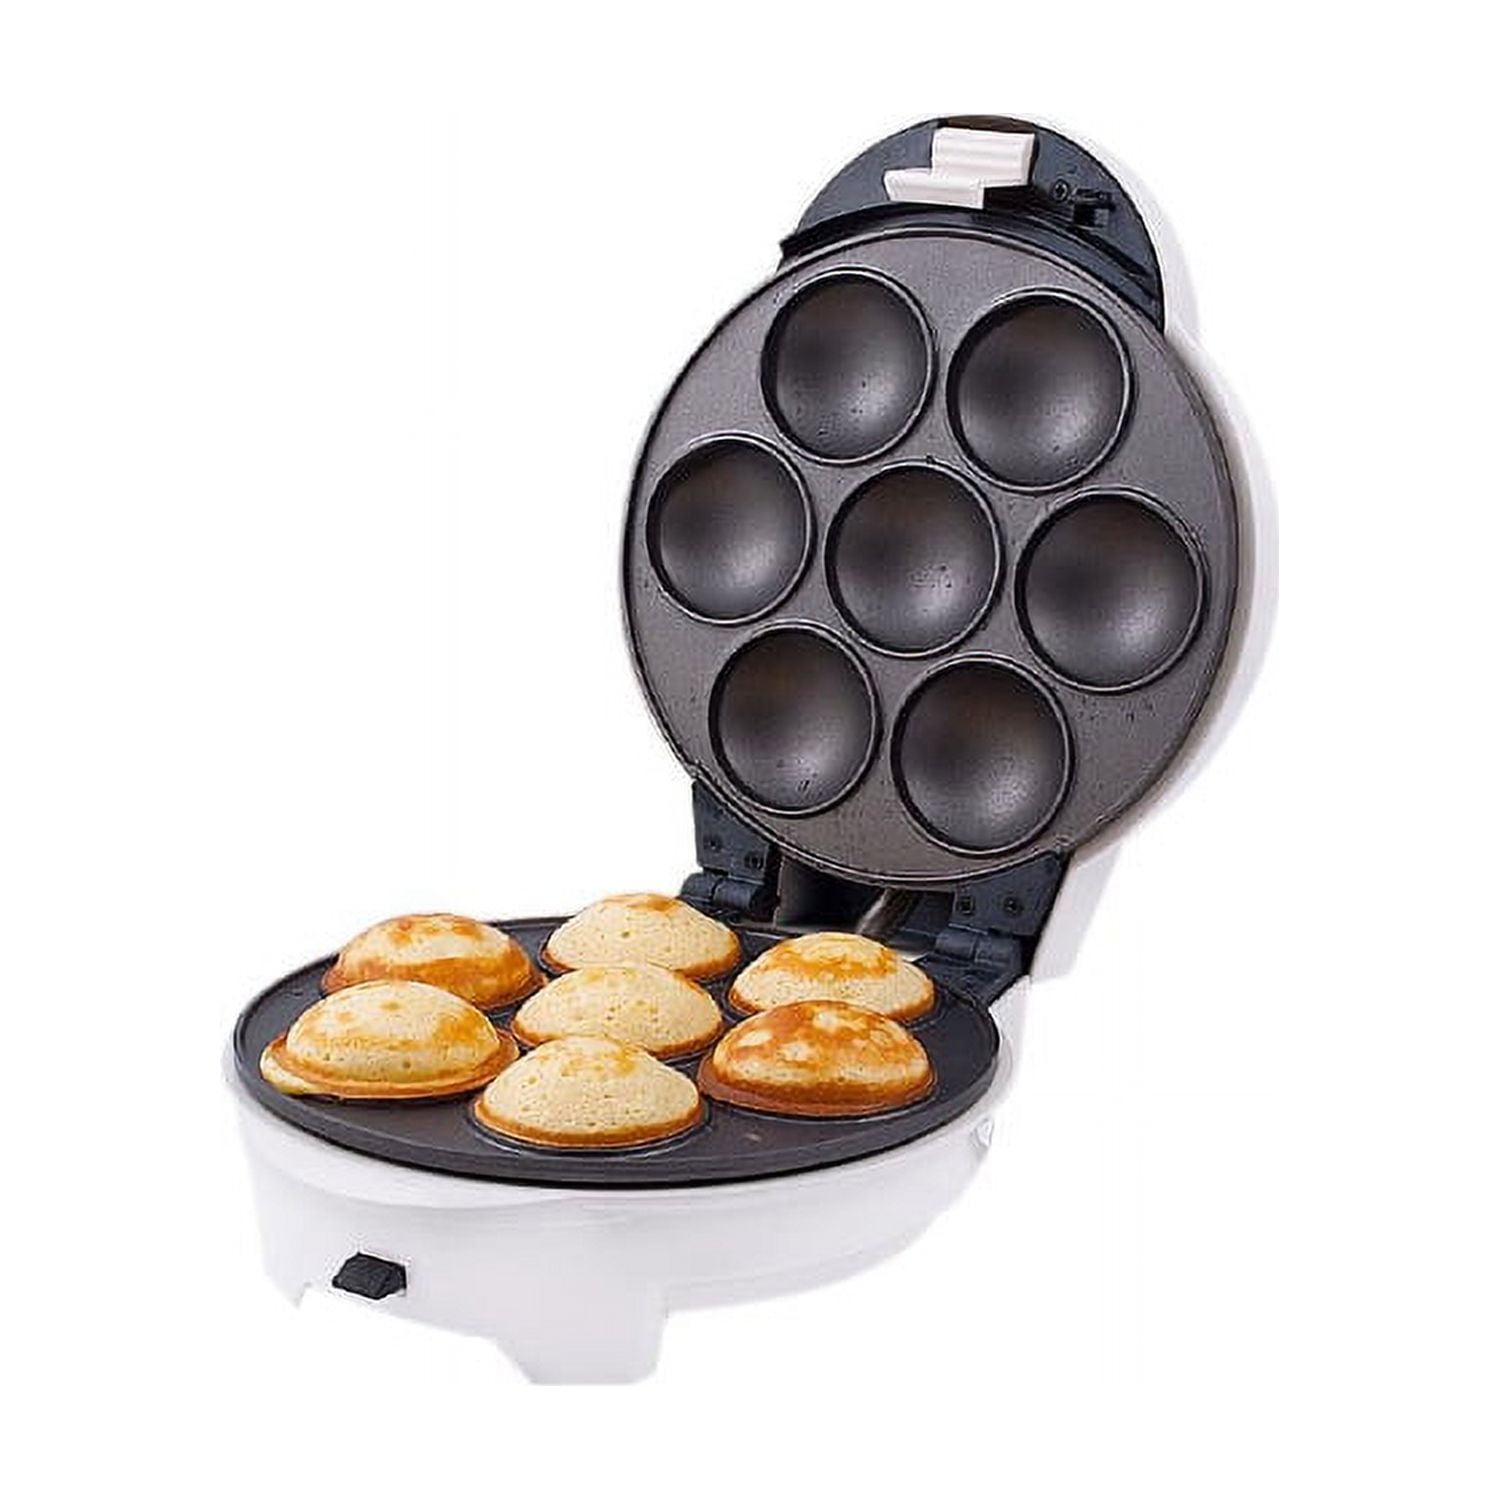  Mini Donut Maker for Kids Breakfast Waffle Sandwich and More  Snacks, Portable Electric Donut Maker Machine with Non stick Surface for 7  Doughnuts, Double Sided Heating: Home & Kitchen